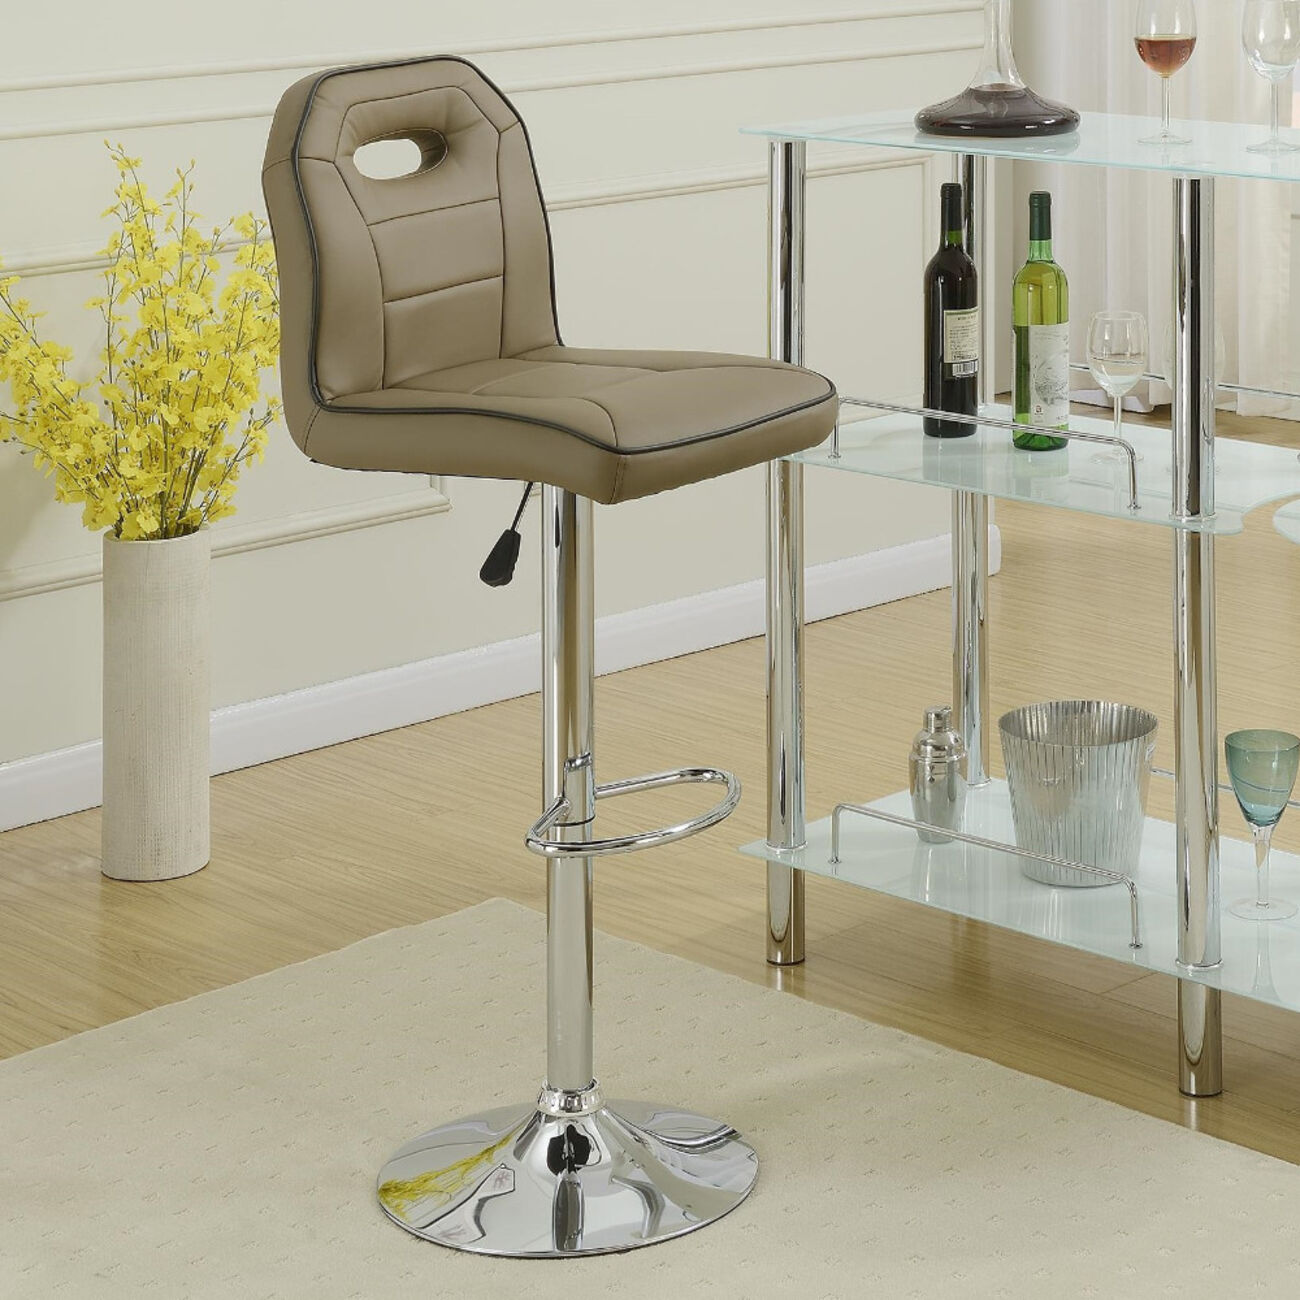 Swivel Bar Stool With Adjustable Height And Foot rest Set Of 2 Brown